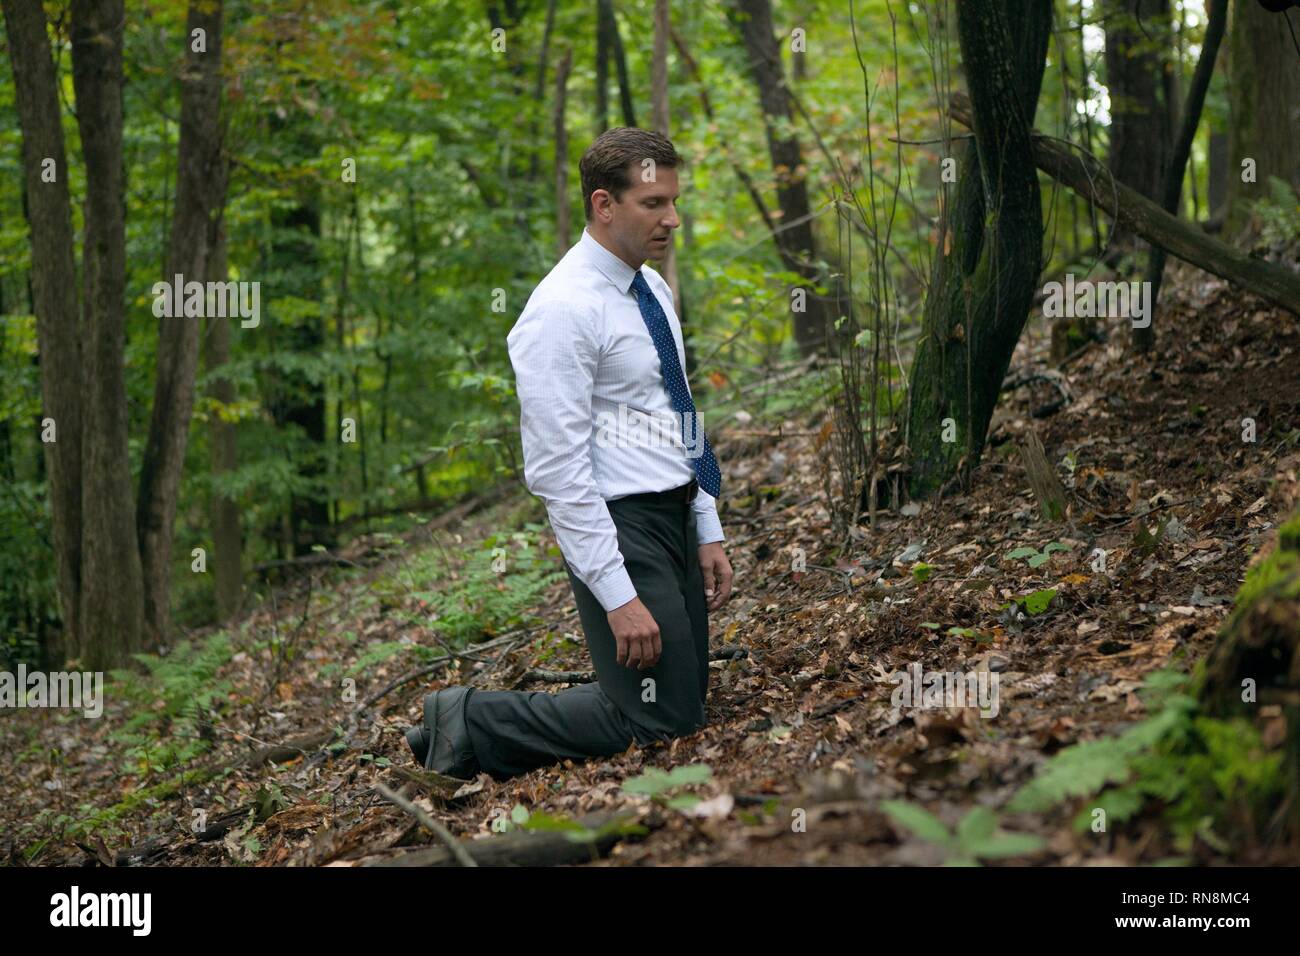 BRADLEY COOPER, THE PLACE BEYOND THE PINES, 2012 Stock Photo - Alamy